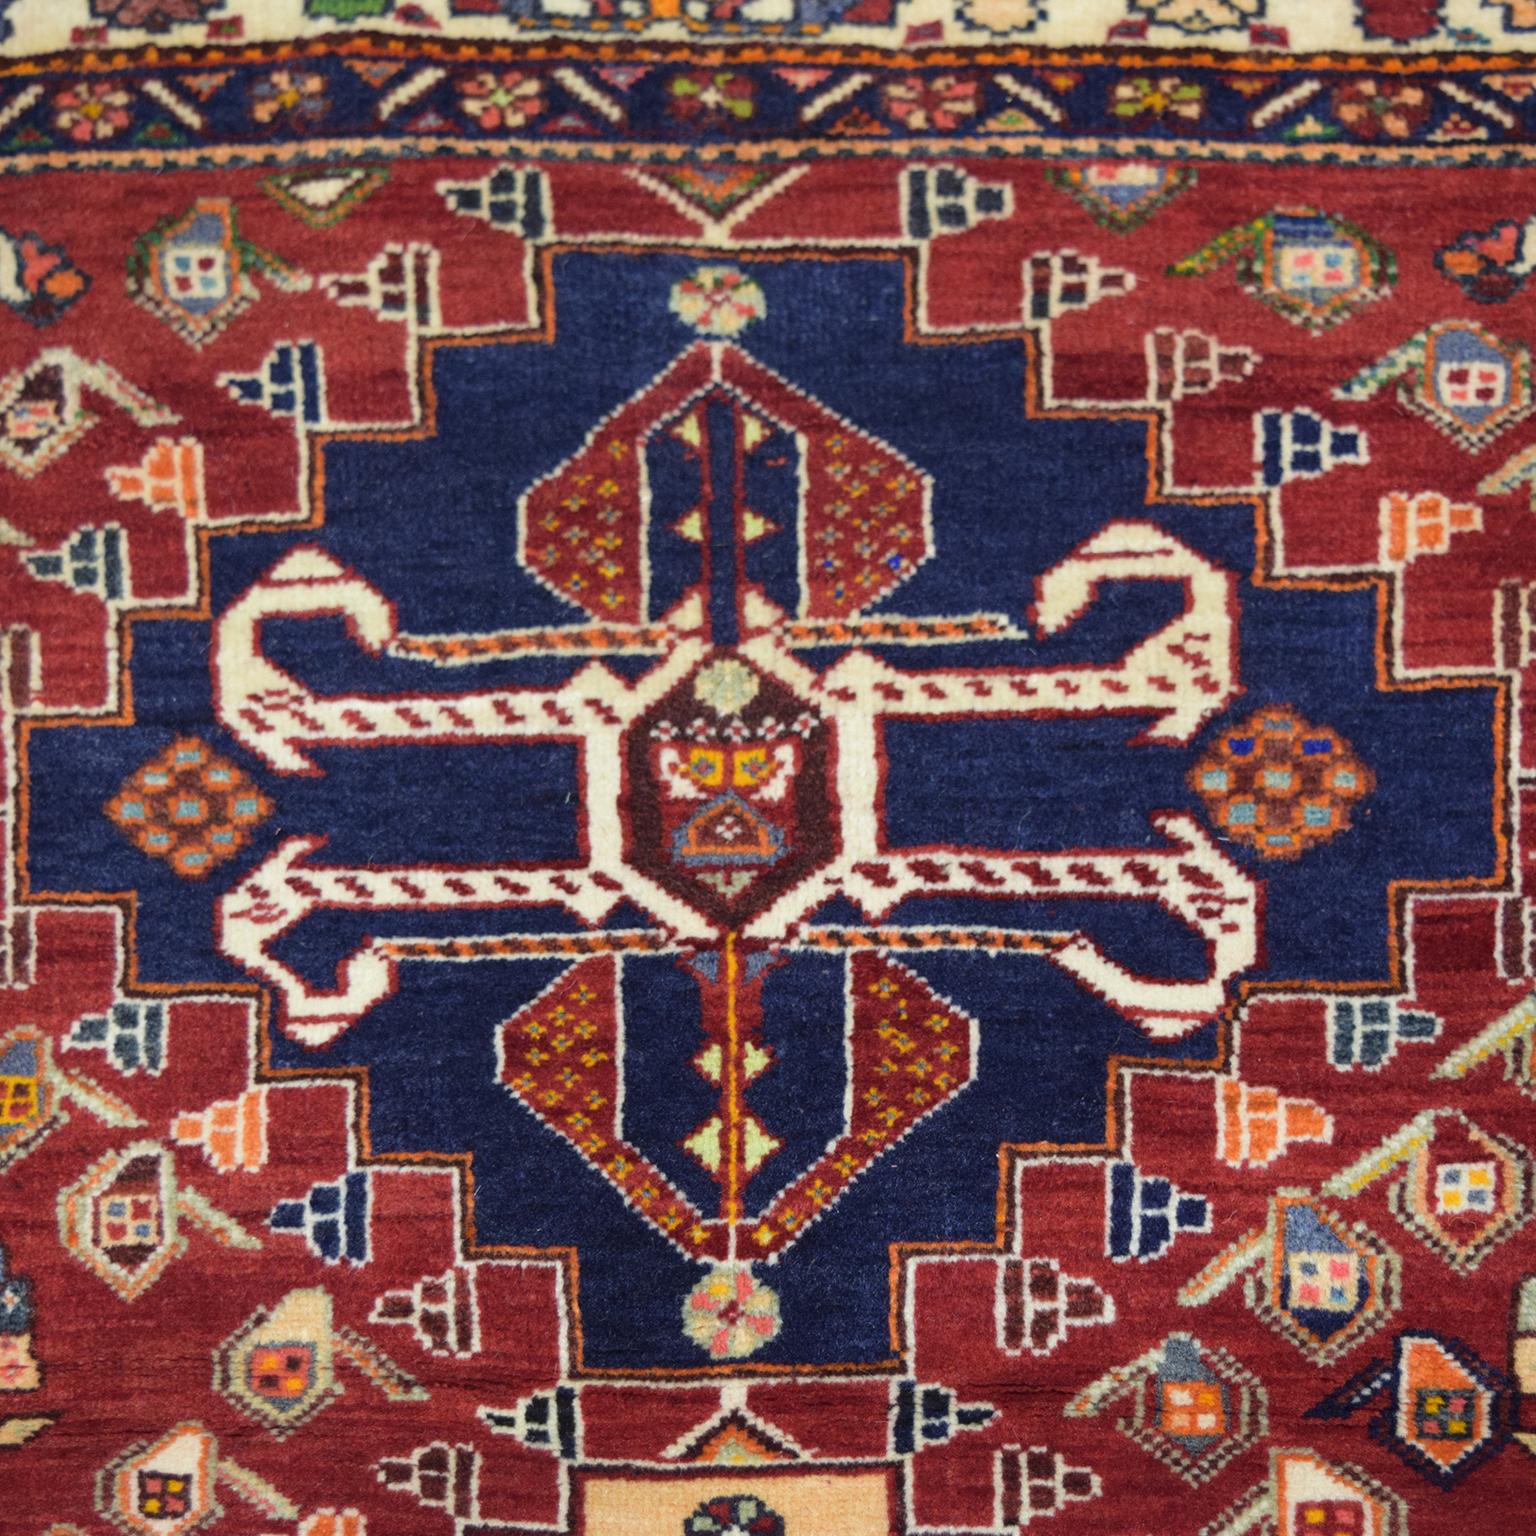 Measuring 3’7” x 5’7”, this transitional red, blue, and cream Persian Kashkouli wool carpet is hand-knotted and belongs to the Orley Shabahang World Market Collection. Because this carpet utilizes a traditional Persian weaving technique, this carpet